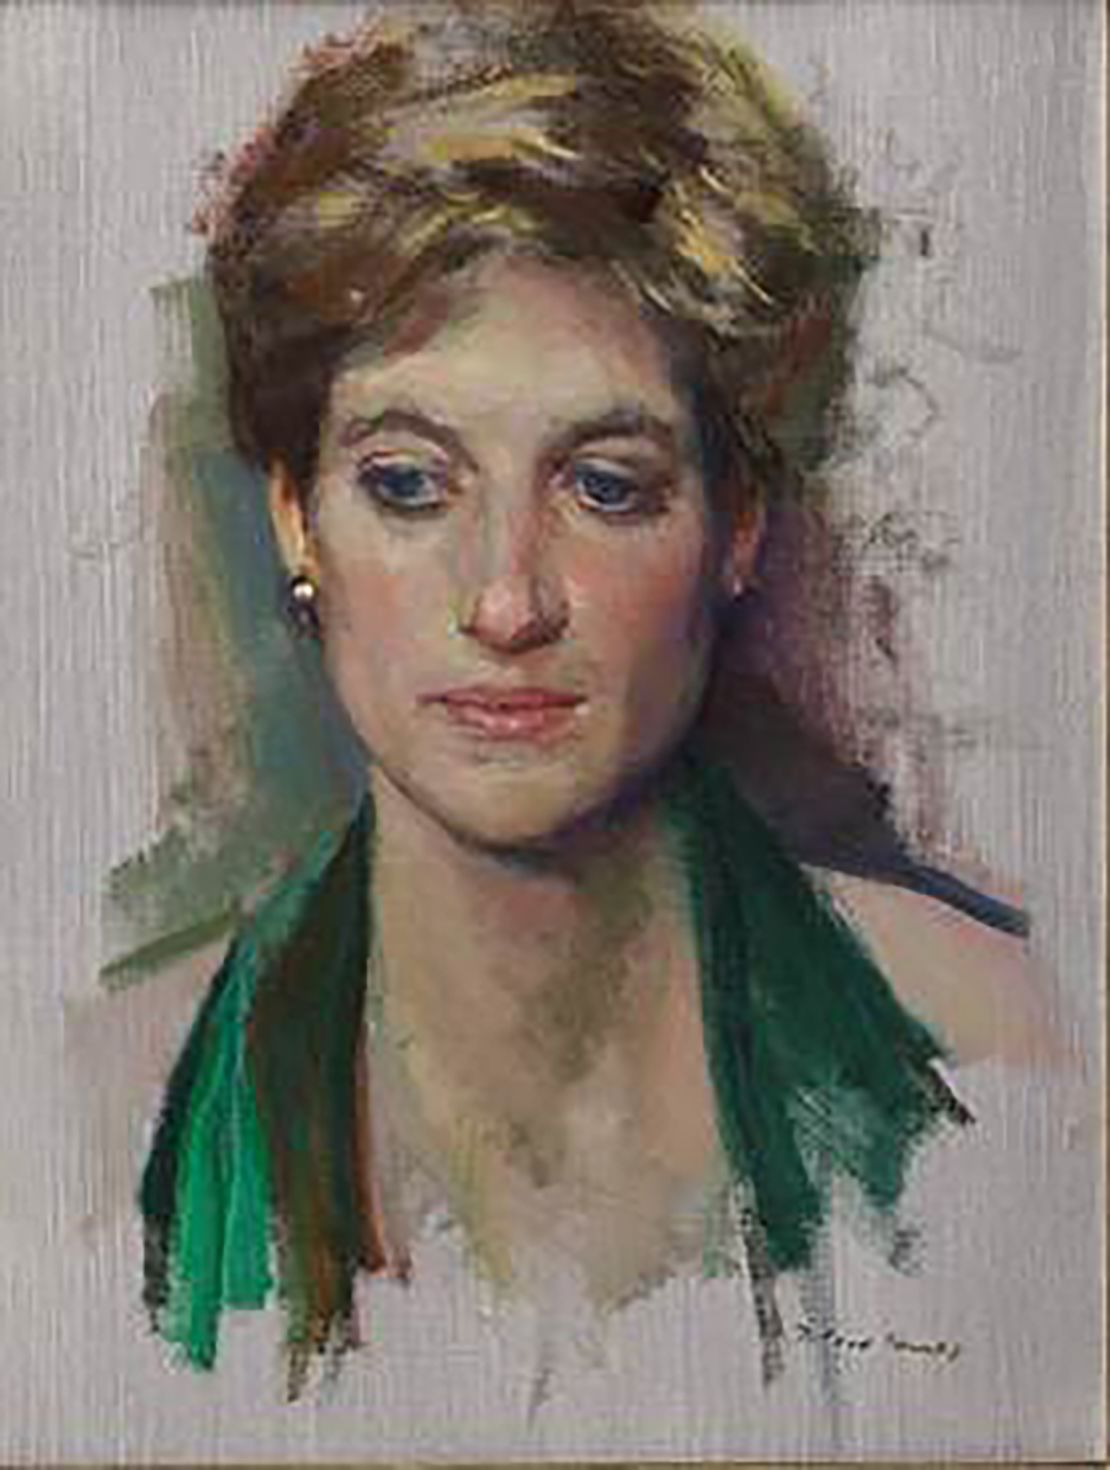 In the portrait, Diana is depicted wearing a Catherine Walker green velvet halter dress that she was also photographed in for a spread in Vanity Fair's June 1997 issue.